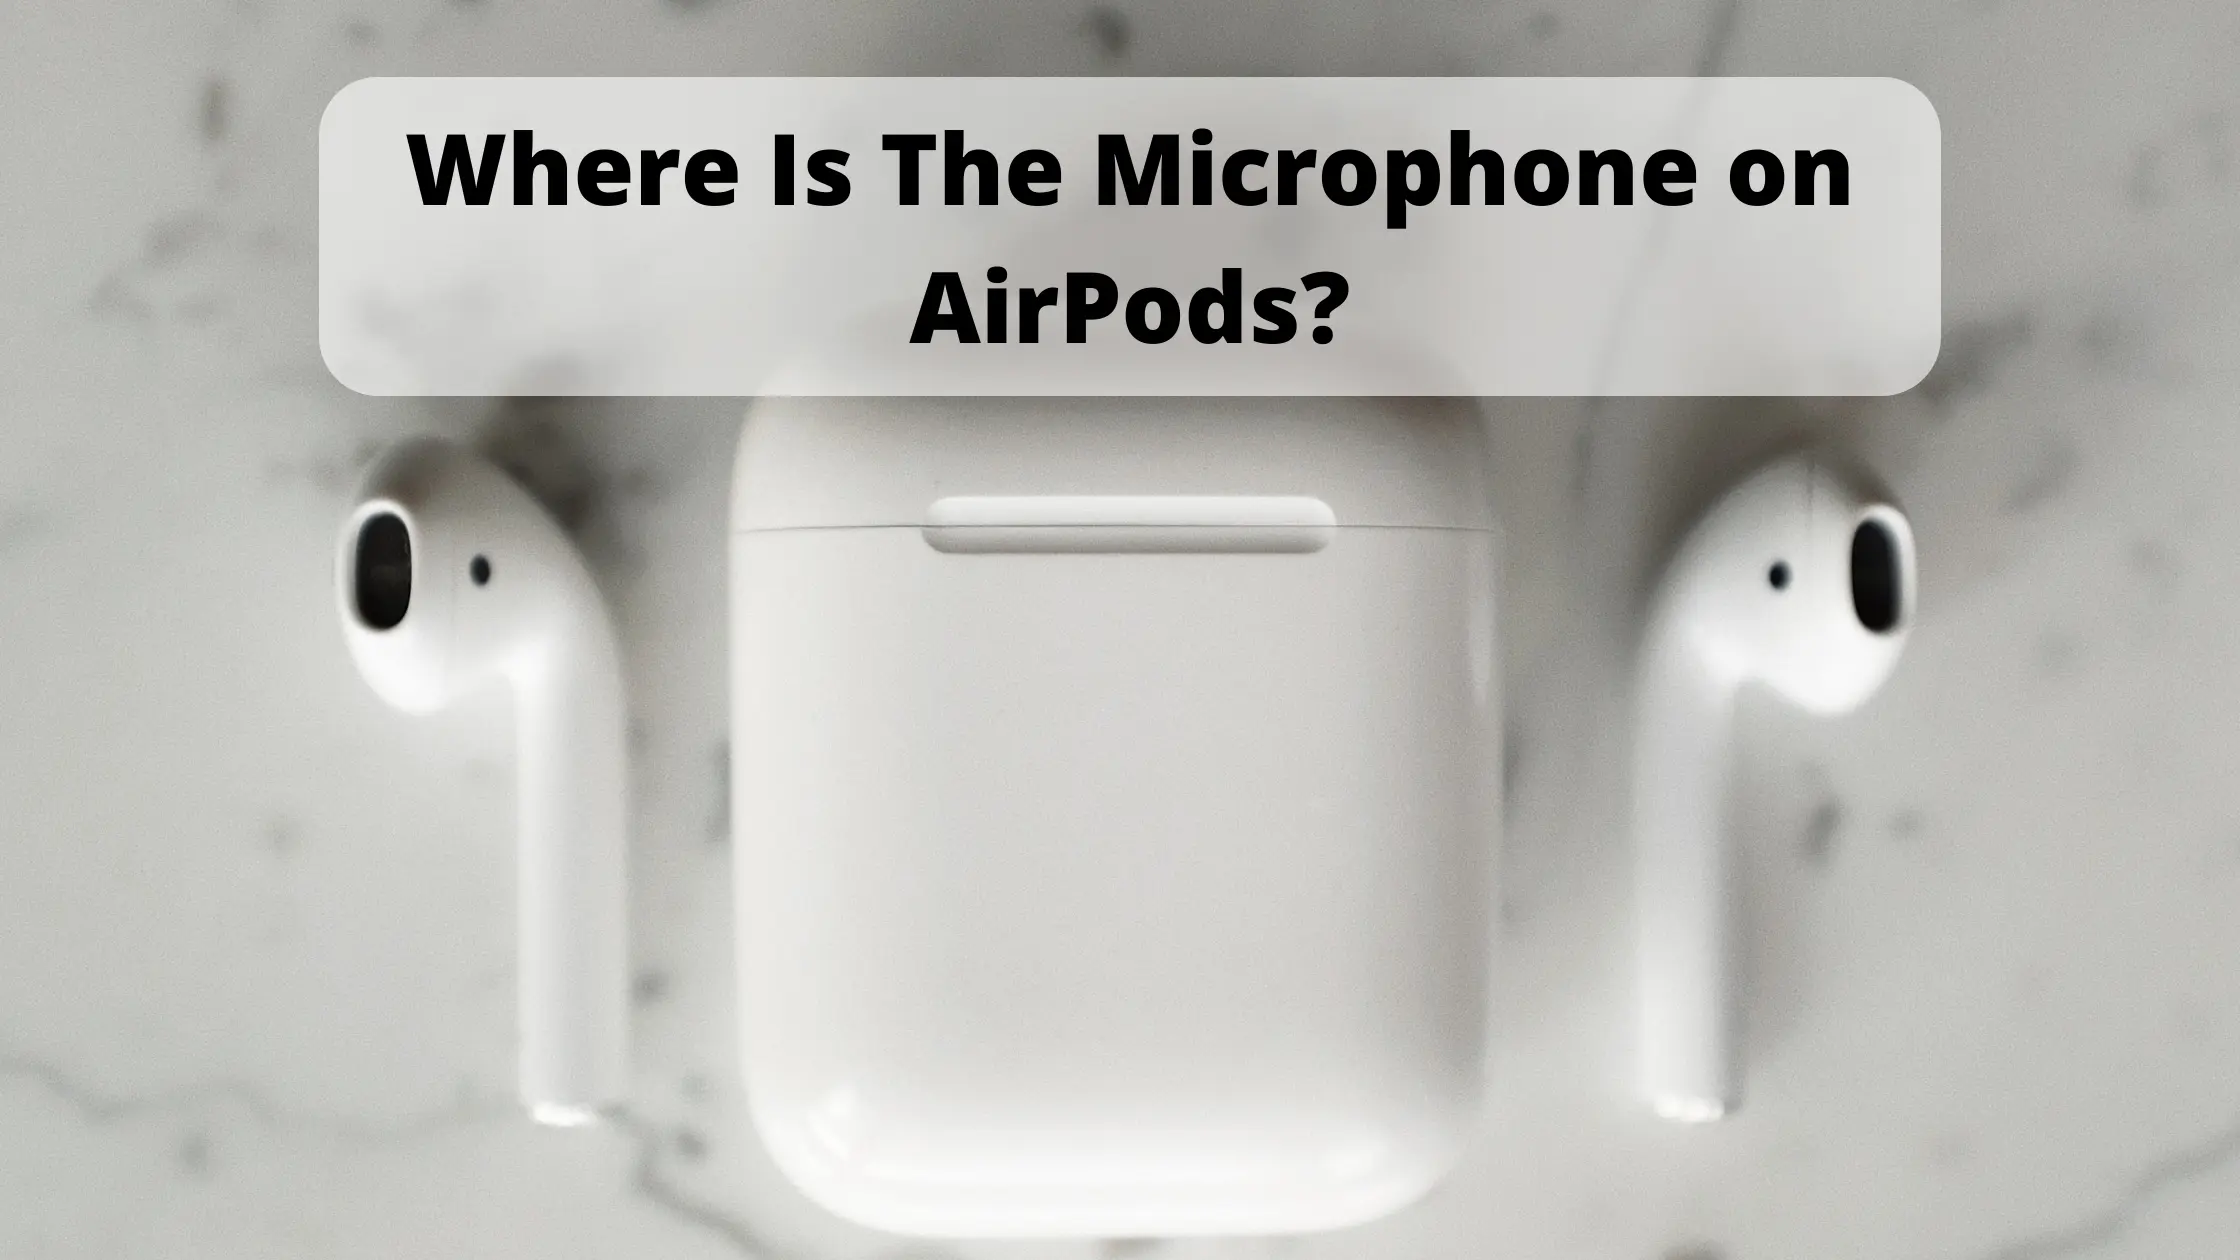 Where Is The Microphone on AirPods